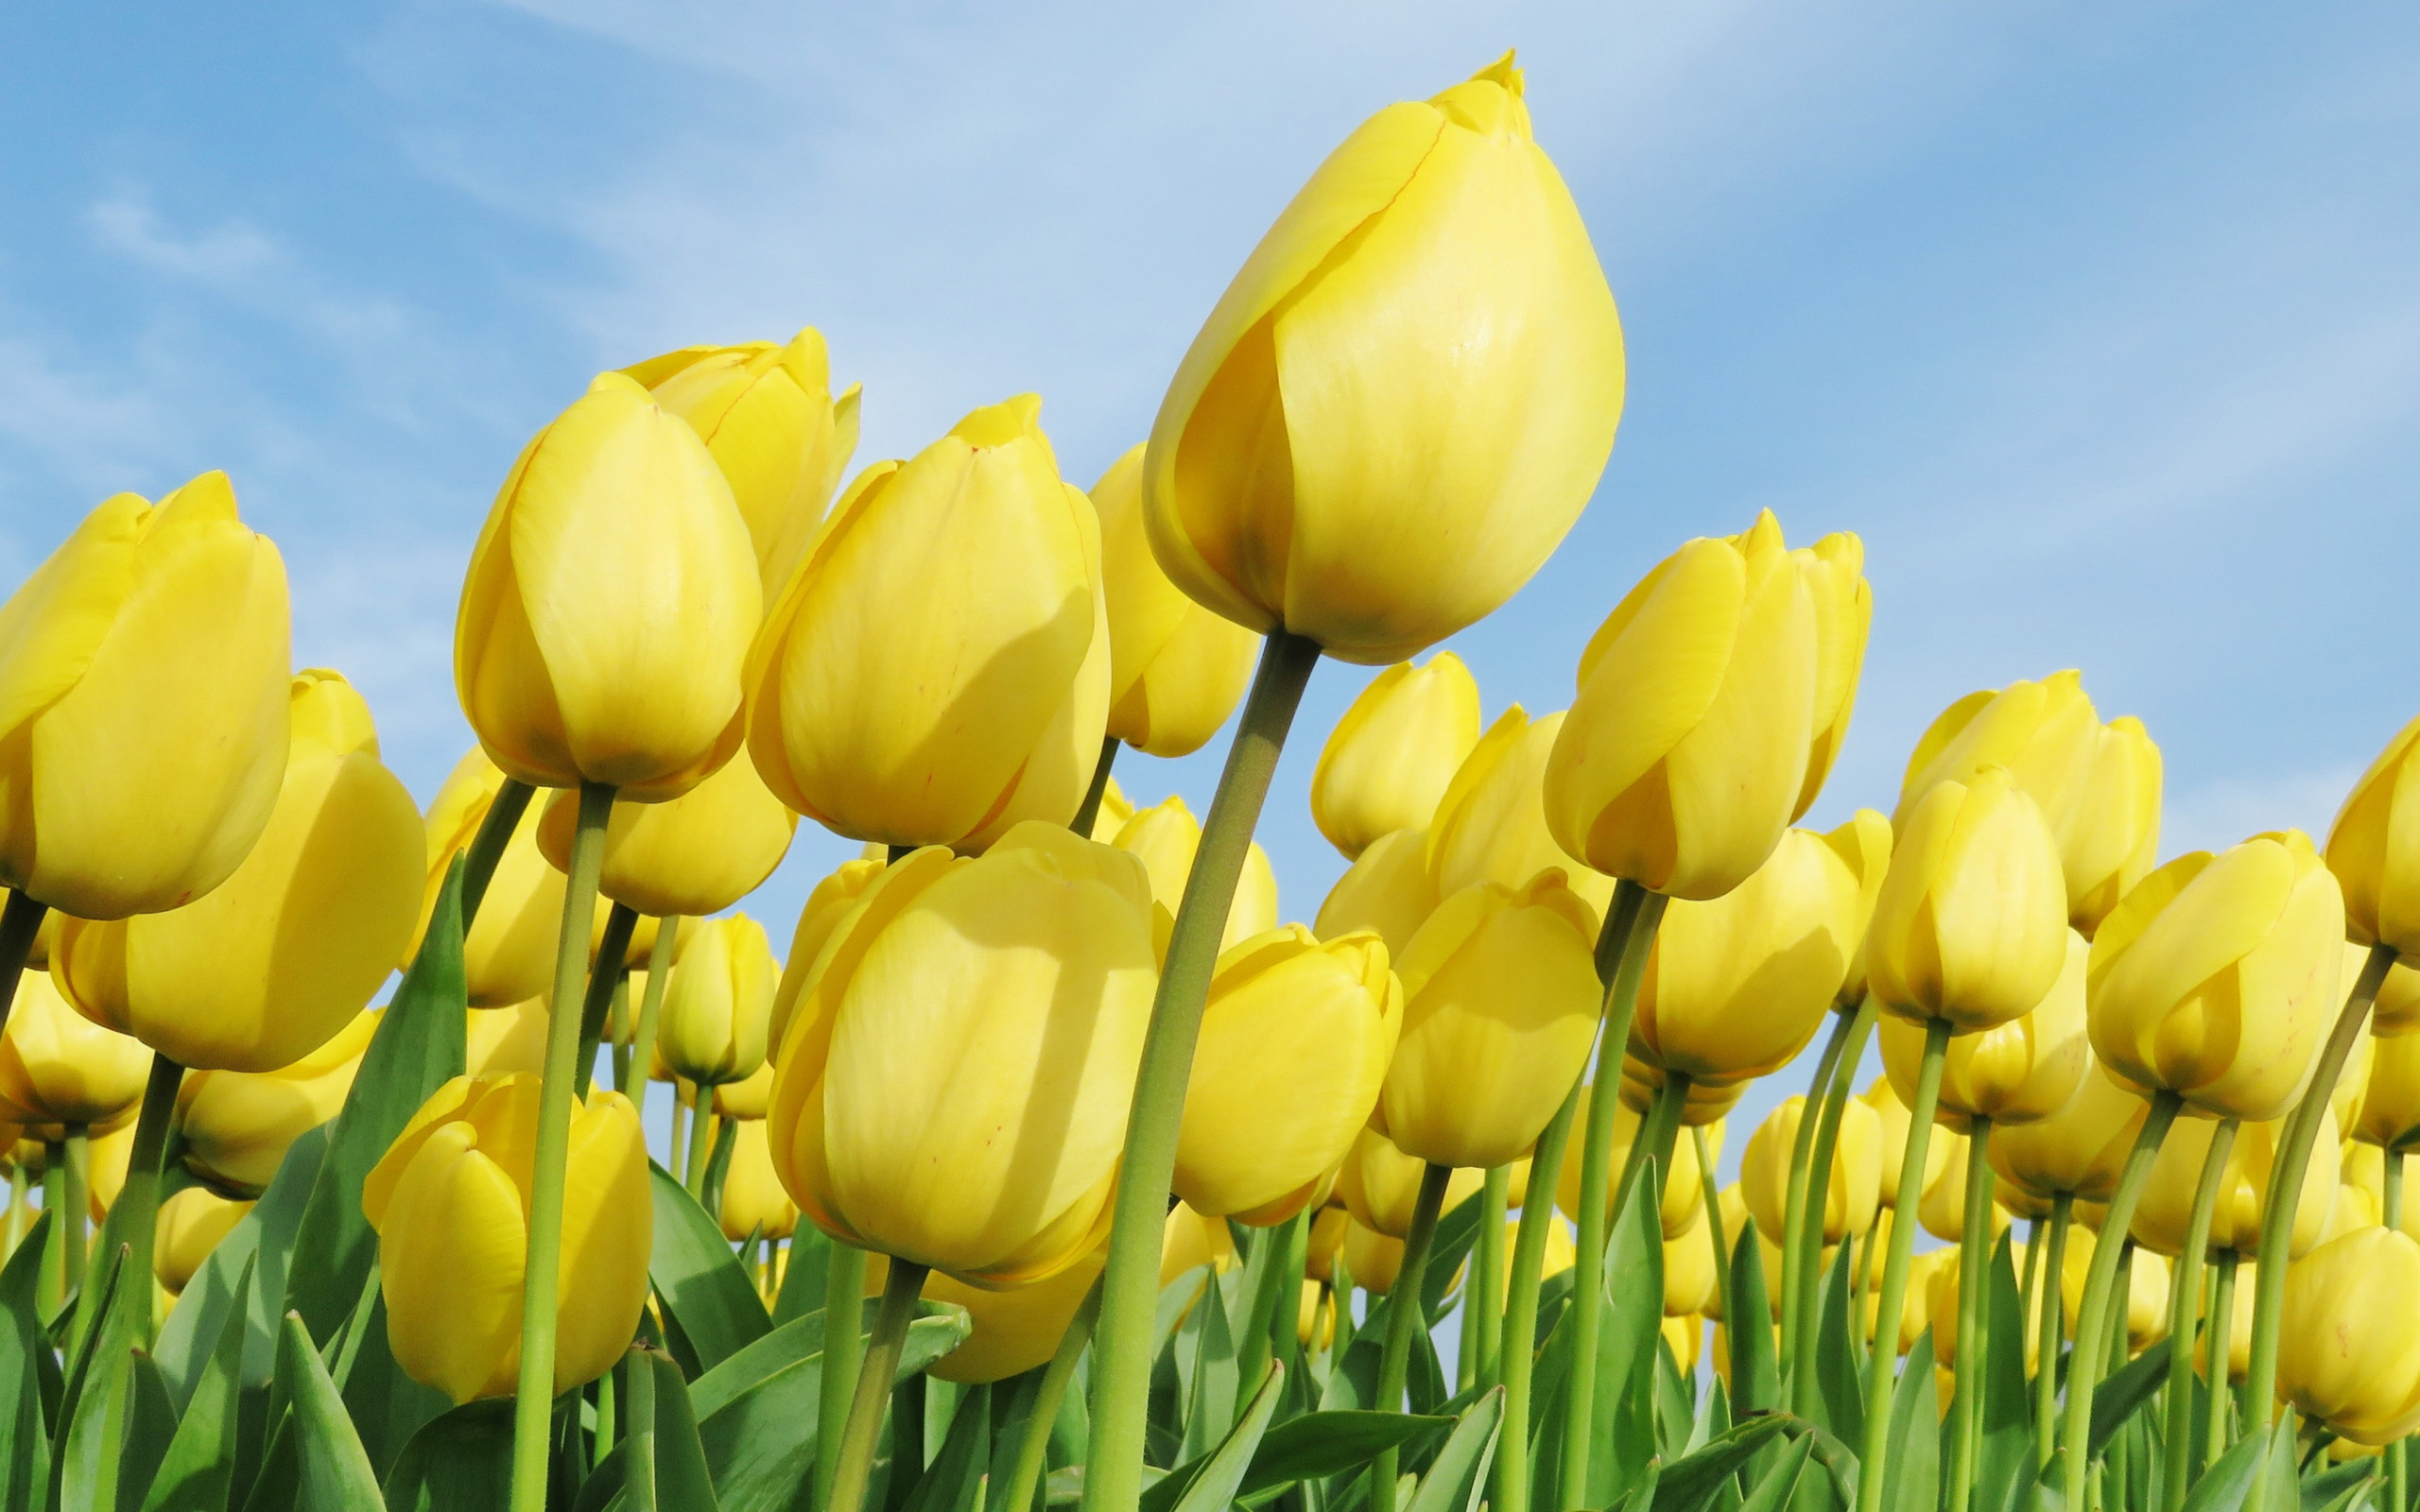 Download wallpapers yellow tulips, yellow flowers, field of tulips